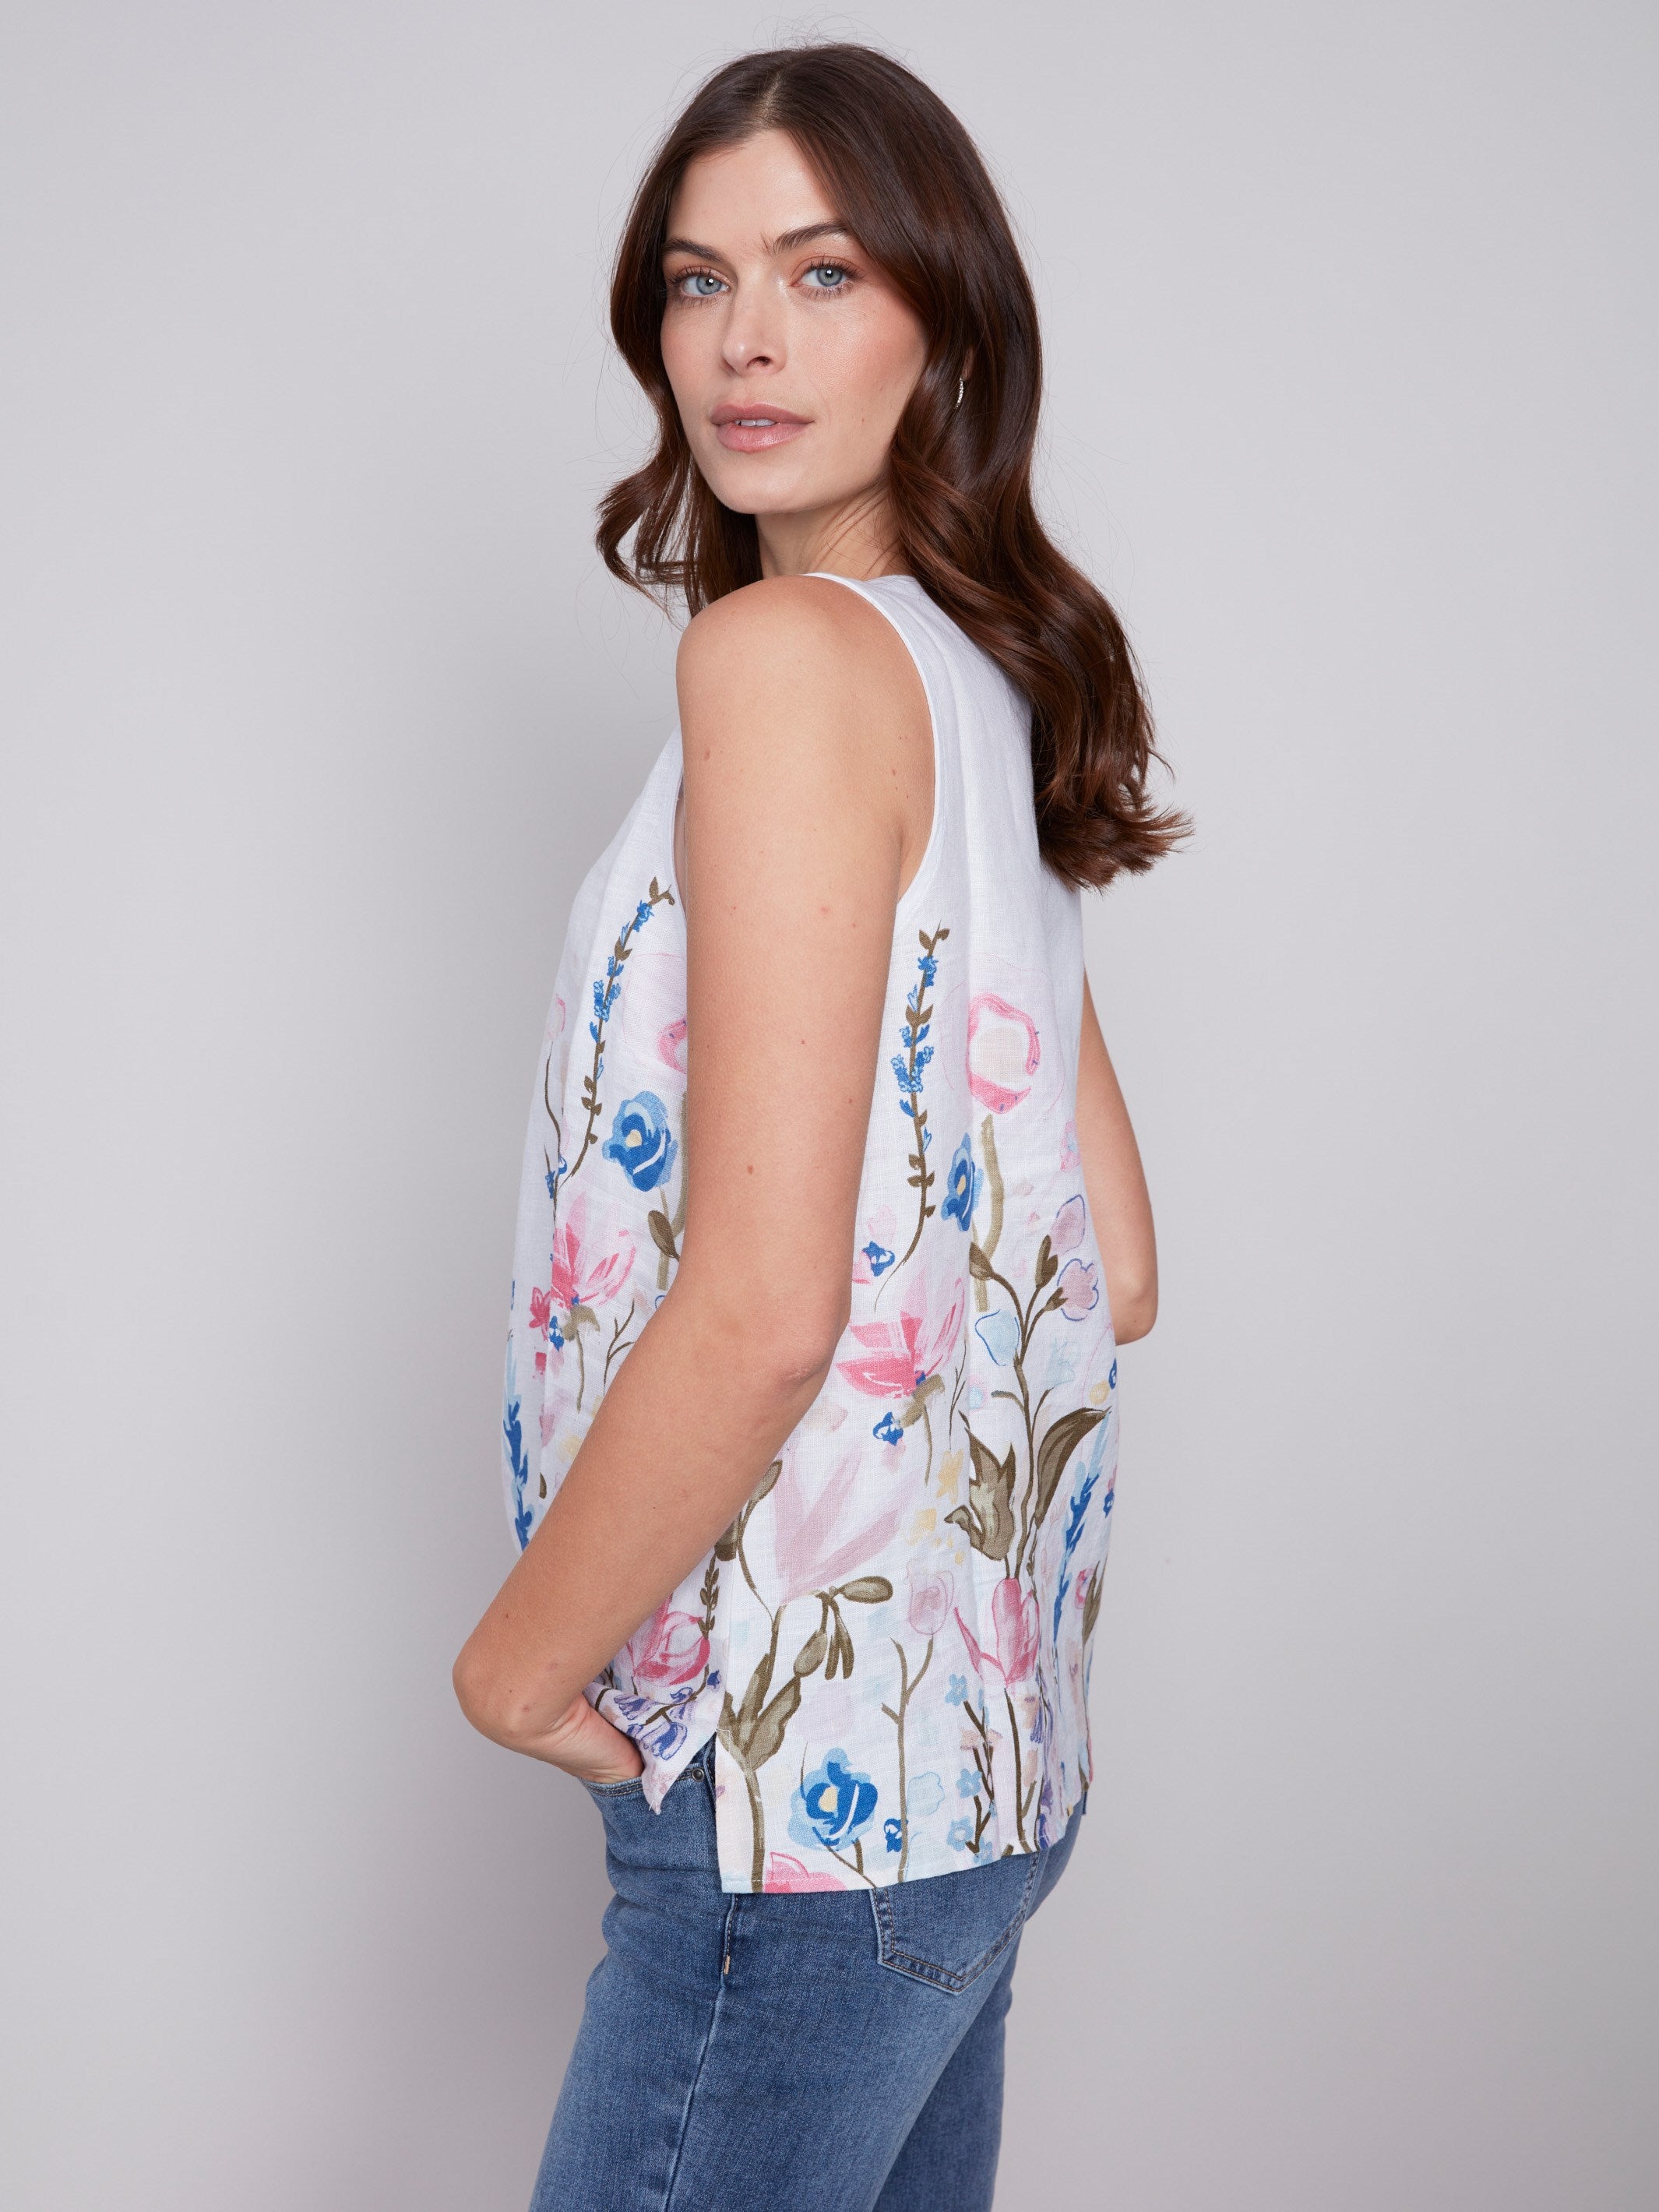 Charlie B Sleeveless Floral Printed Linen Top - Pastel - Image 5